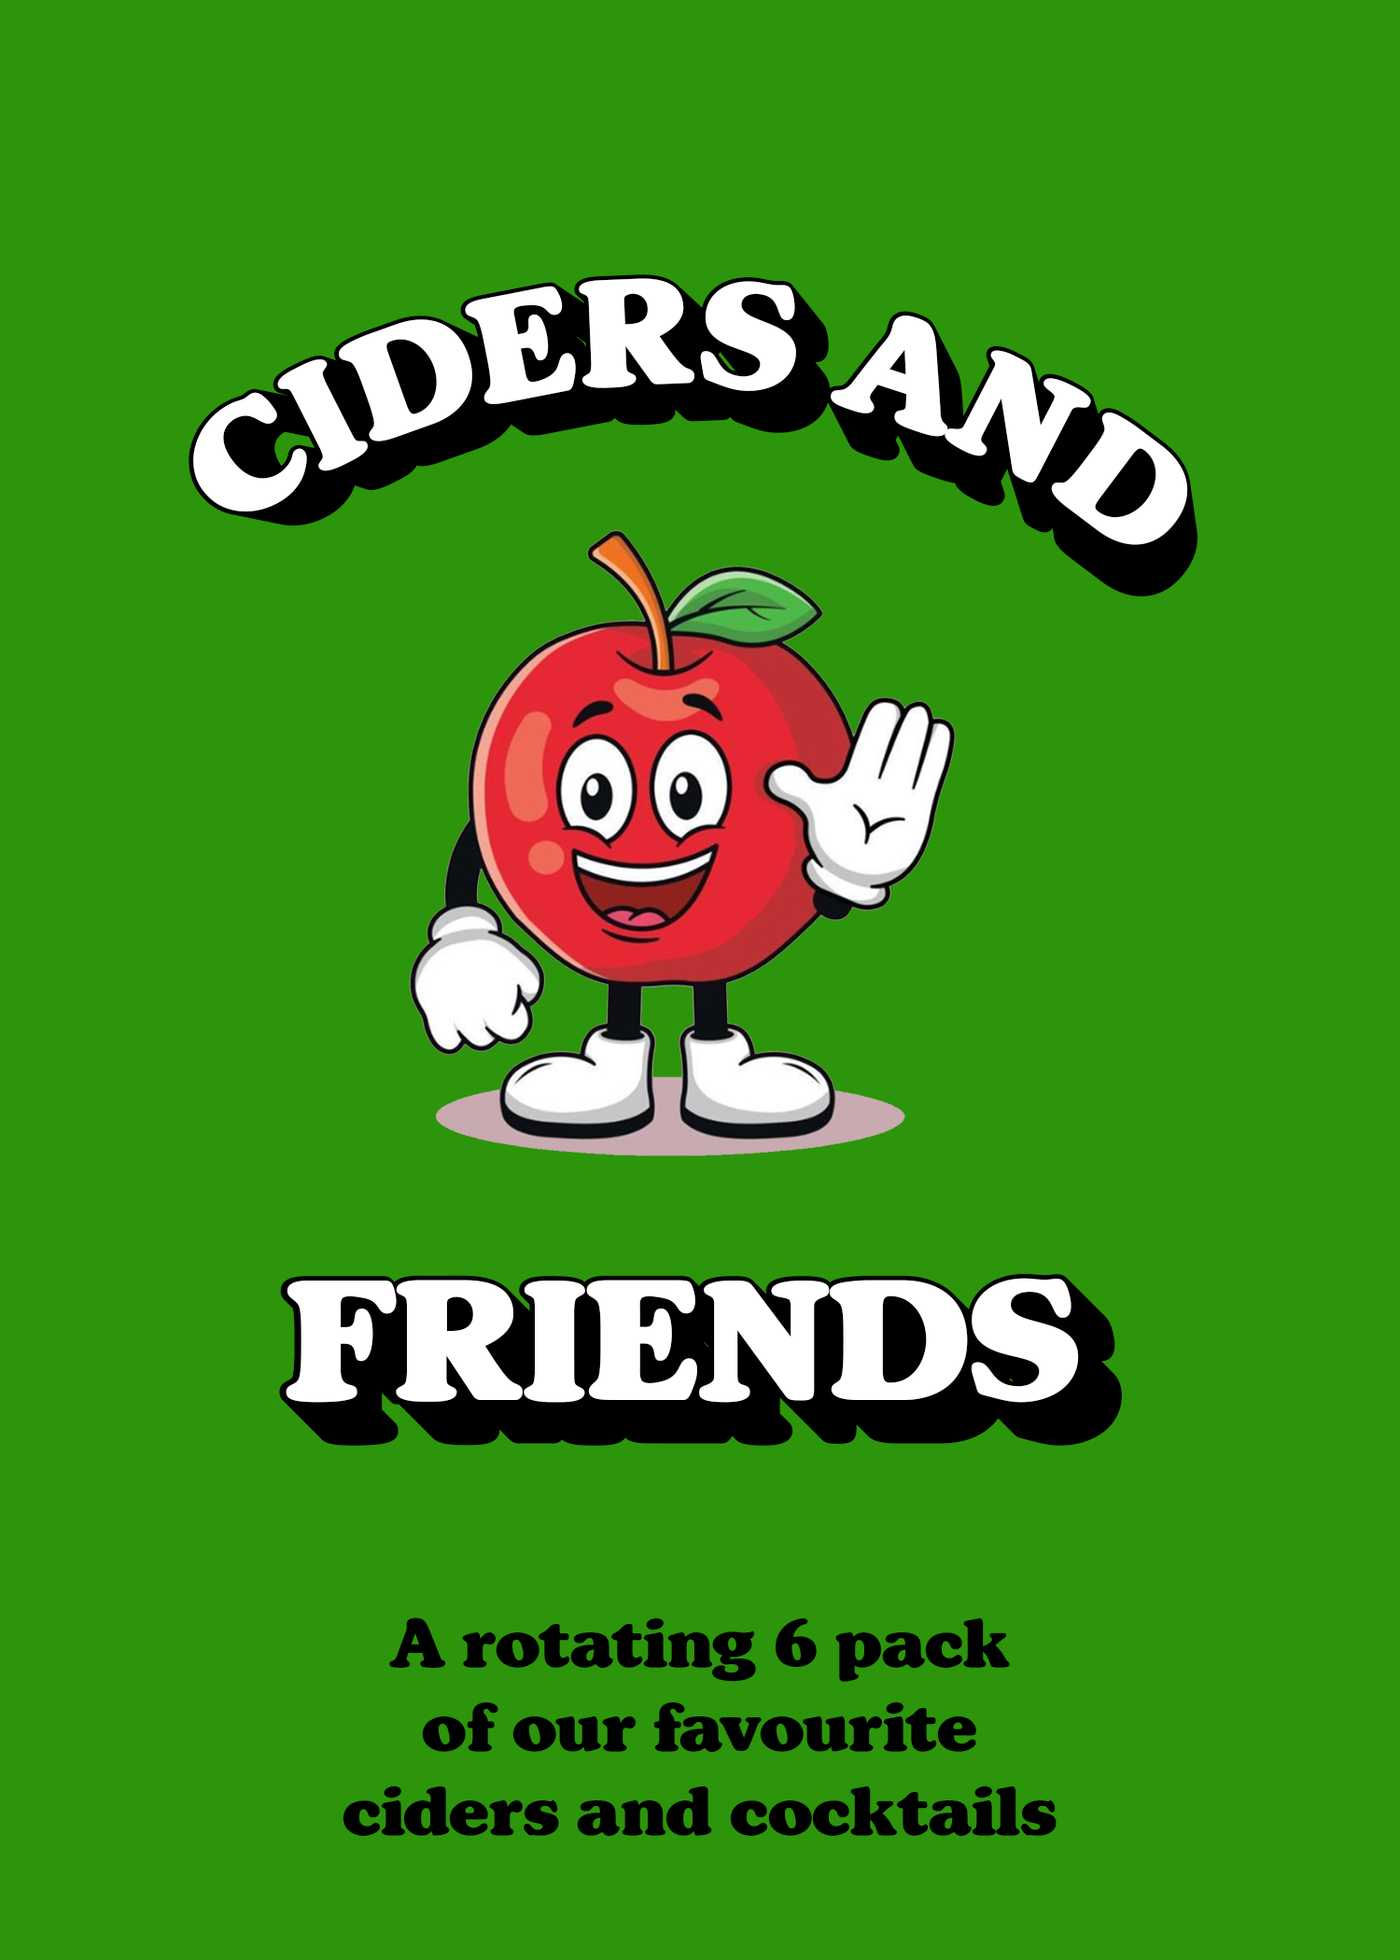 MIXED PACK - CIDERS & FRIENDS 5.0